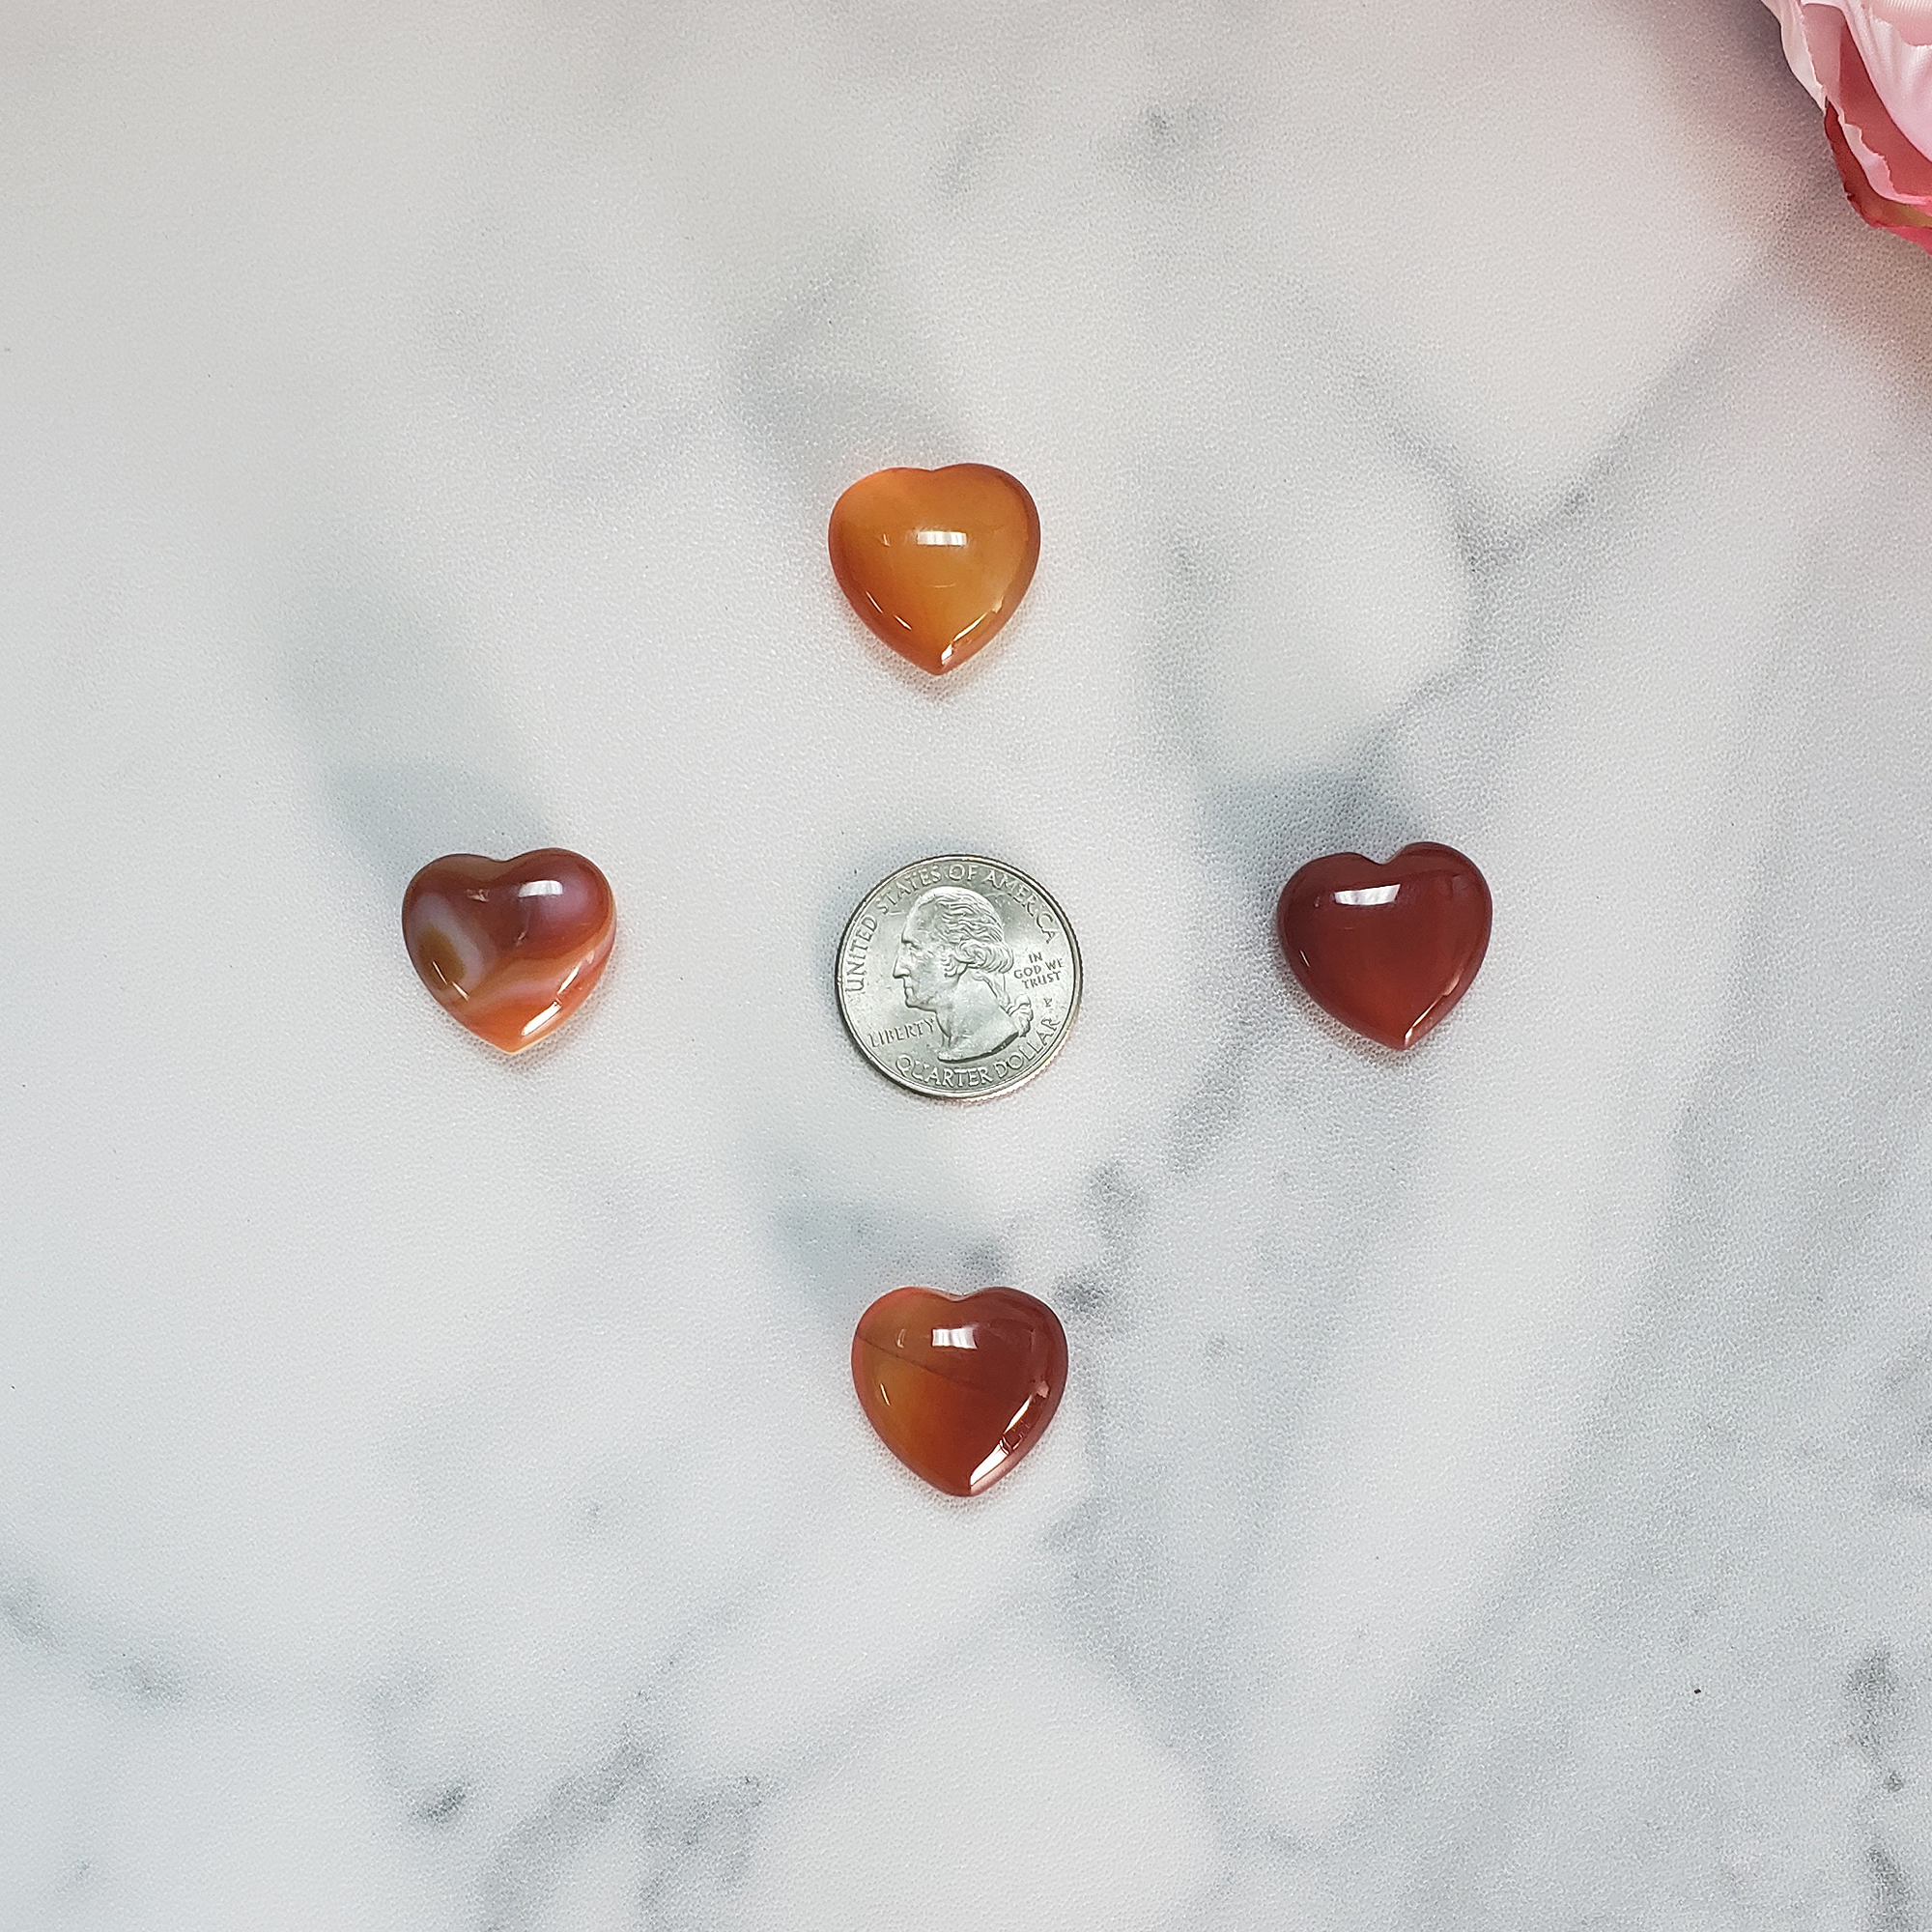 Carnelian Stone Natural Crystal Heart Mini Carving - Size Comparison